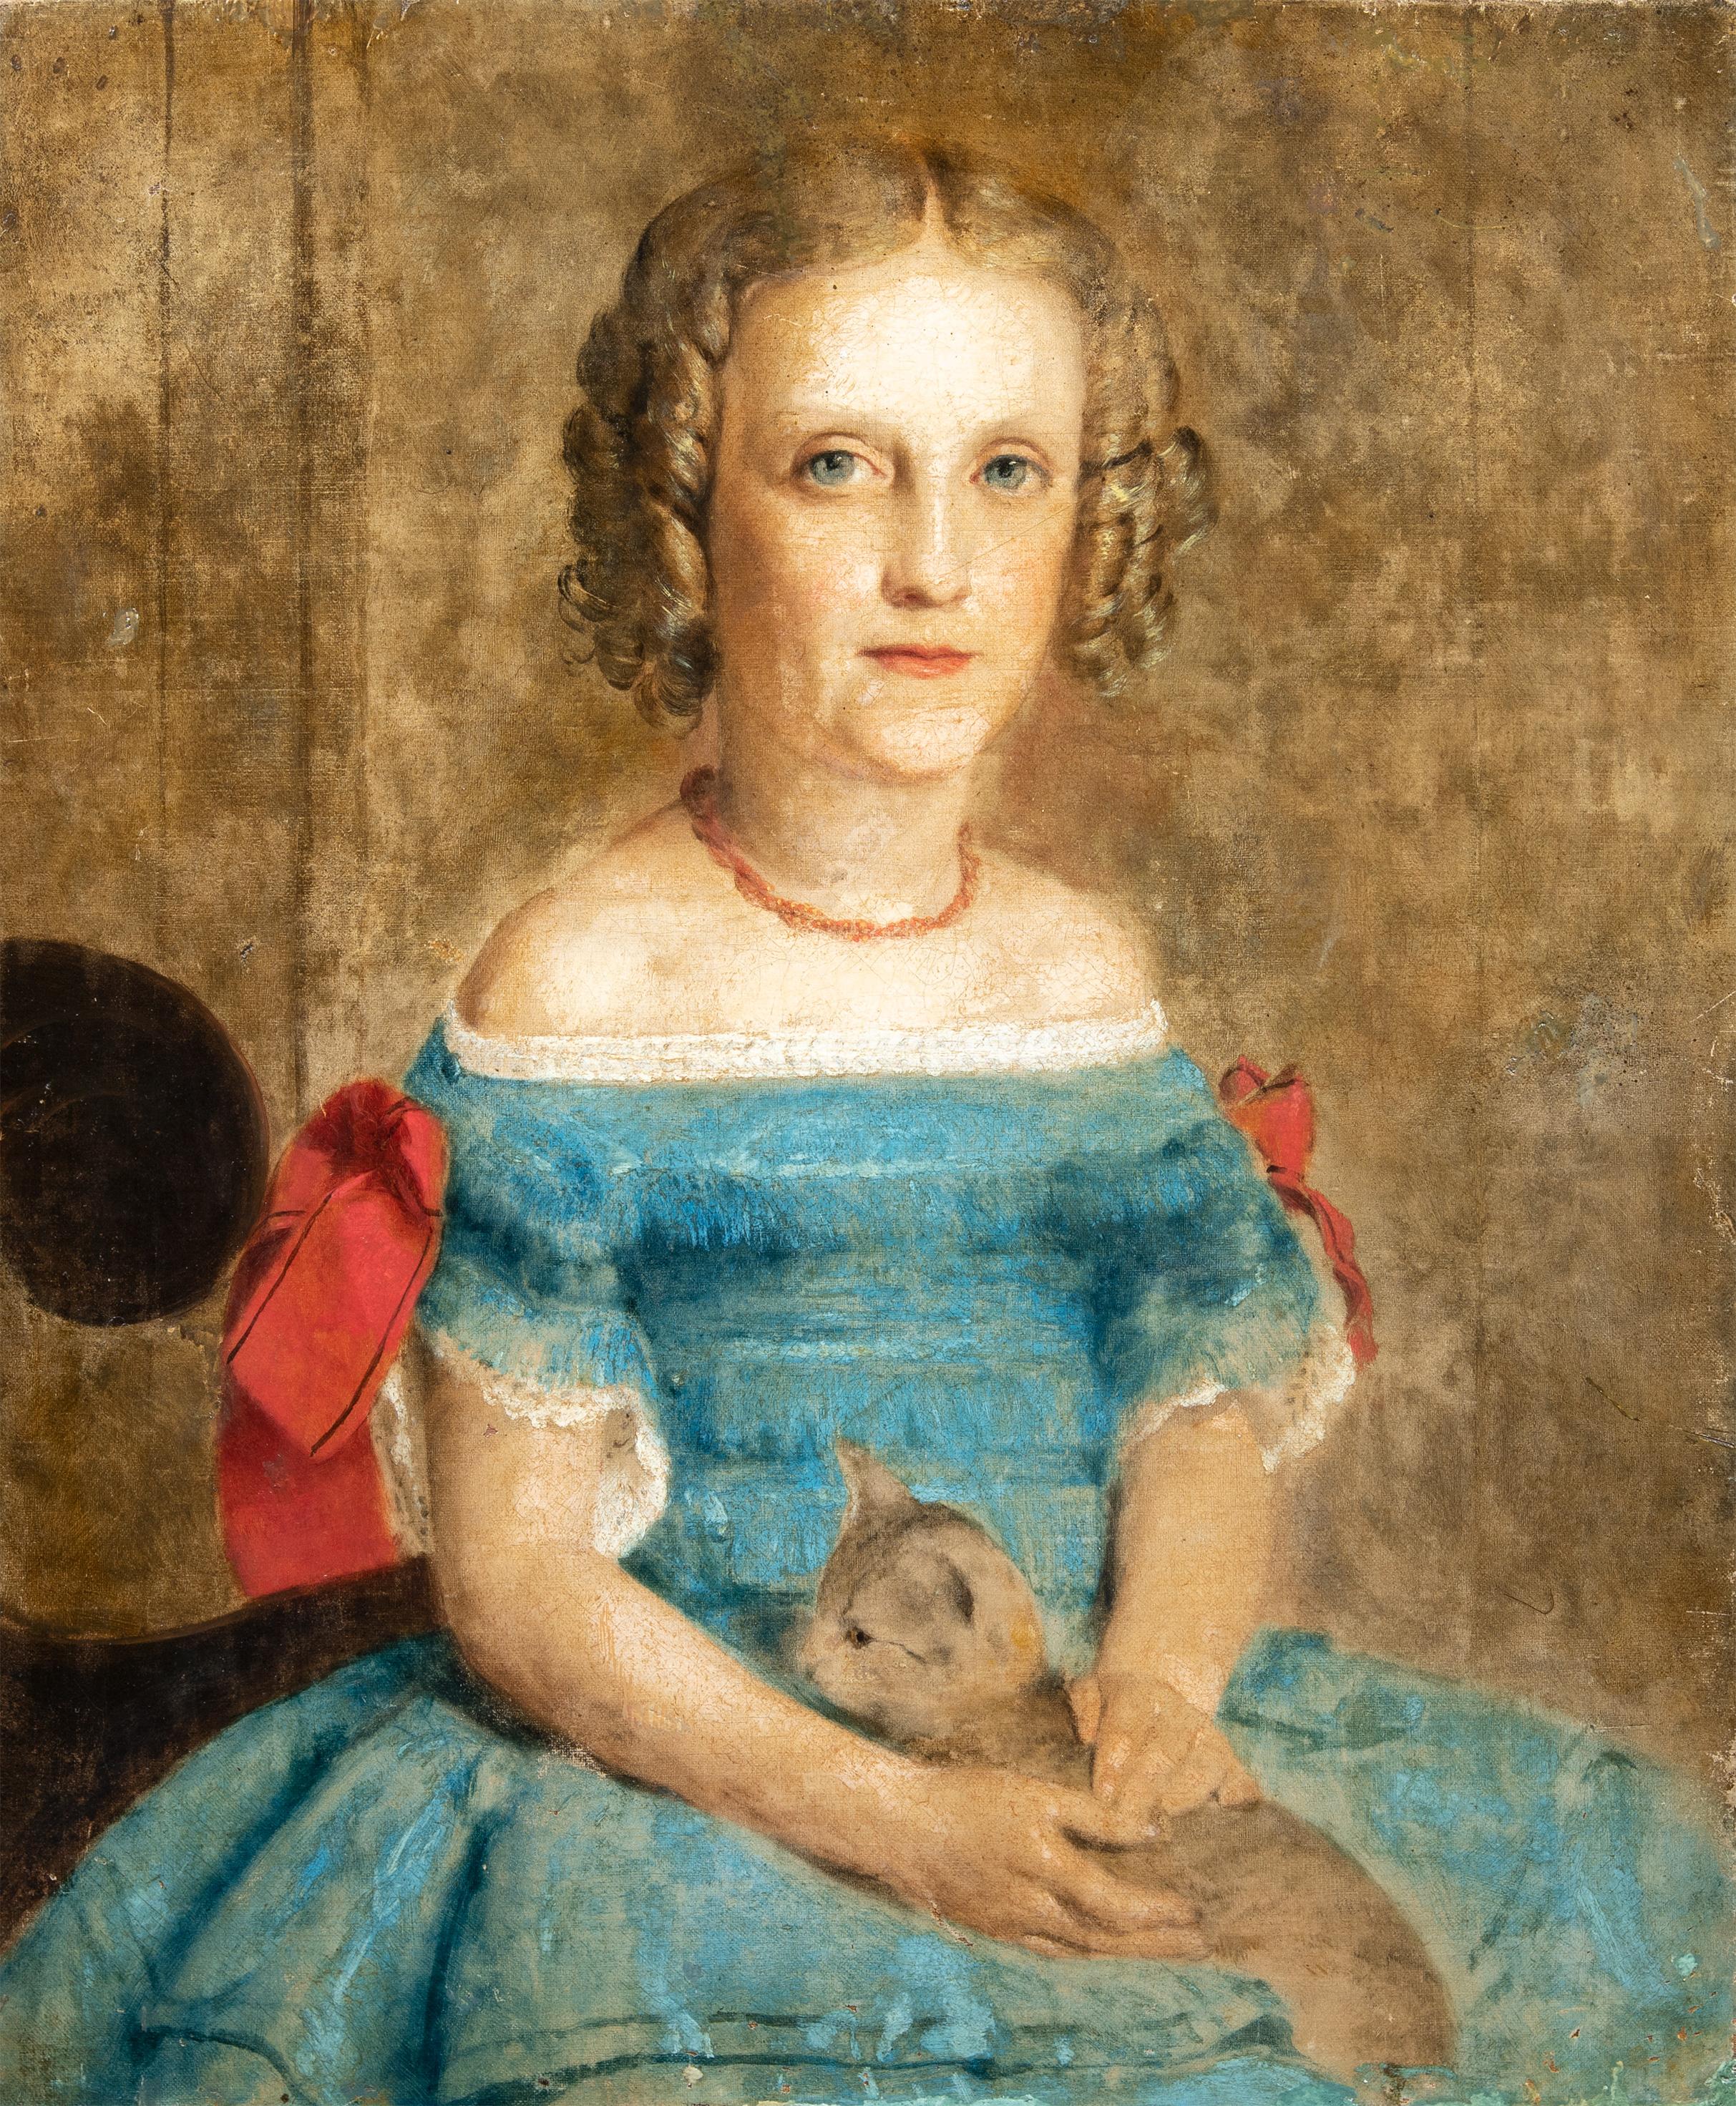 Unknown Portrait Painting - Late 19th century British figure painting - Girl’s portait with cat - English